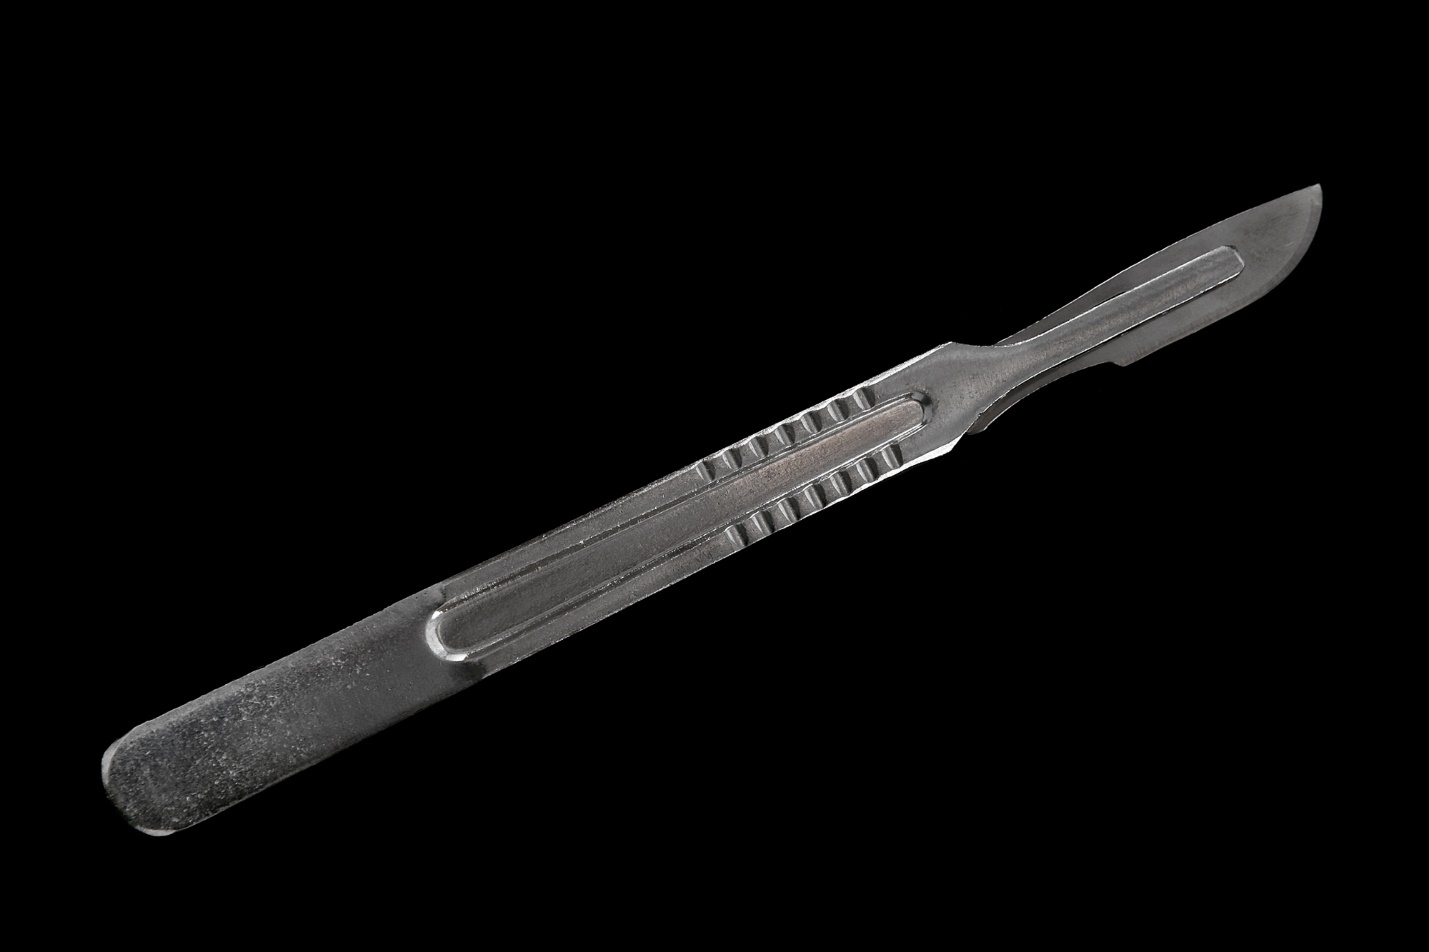 A knife with a black background

Description automatically generated with medium confidence